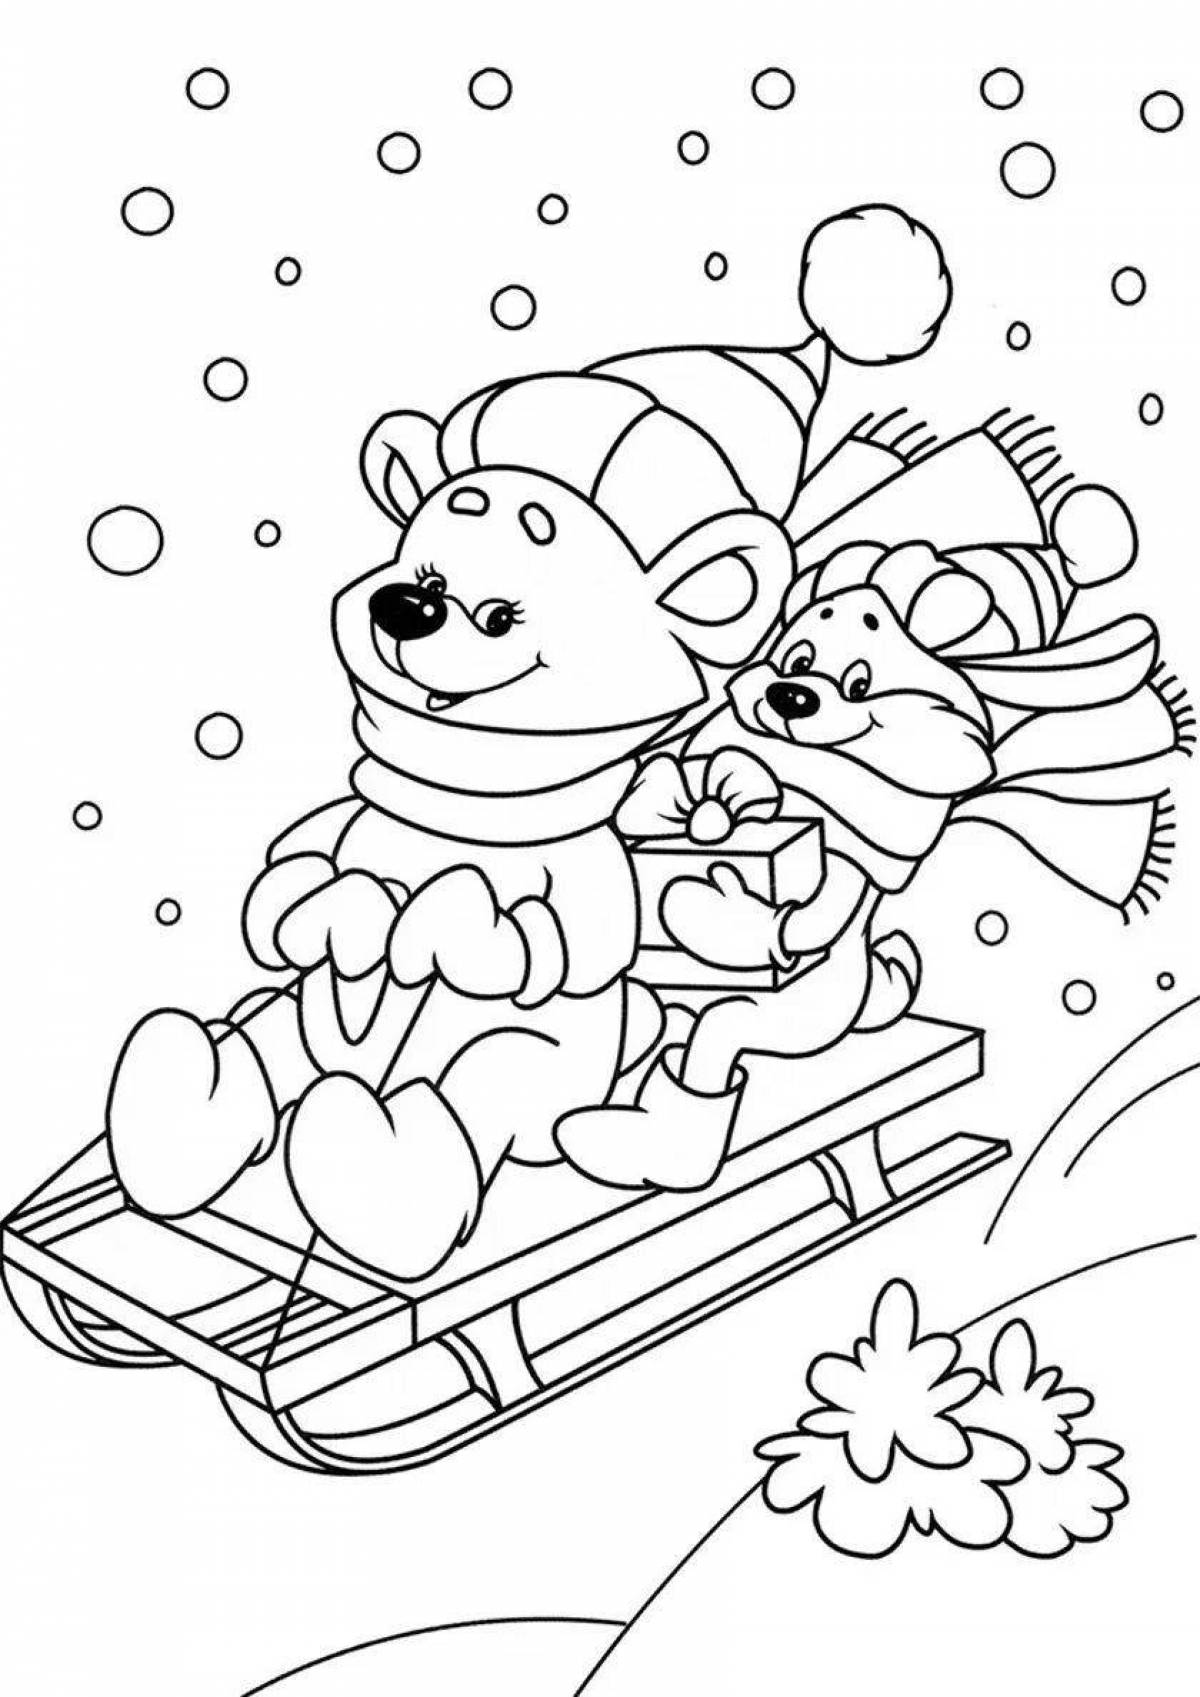 A fascinating winter coloring book